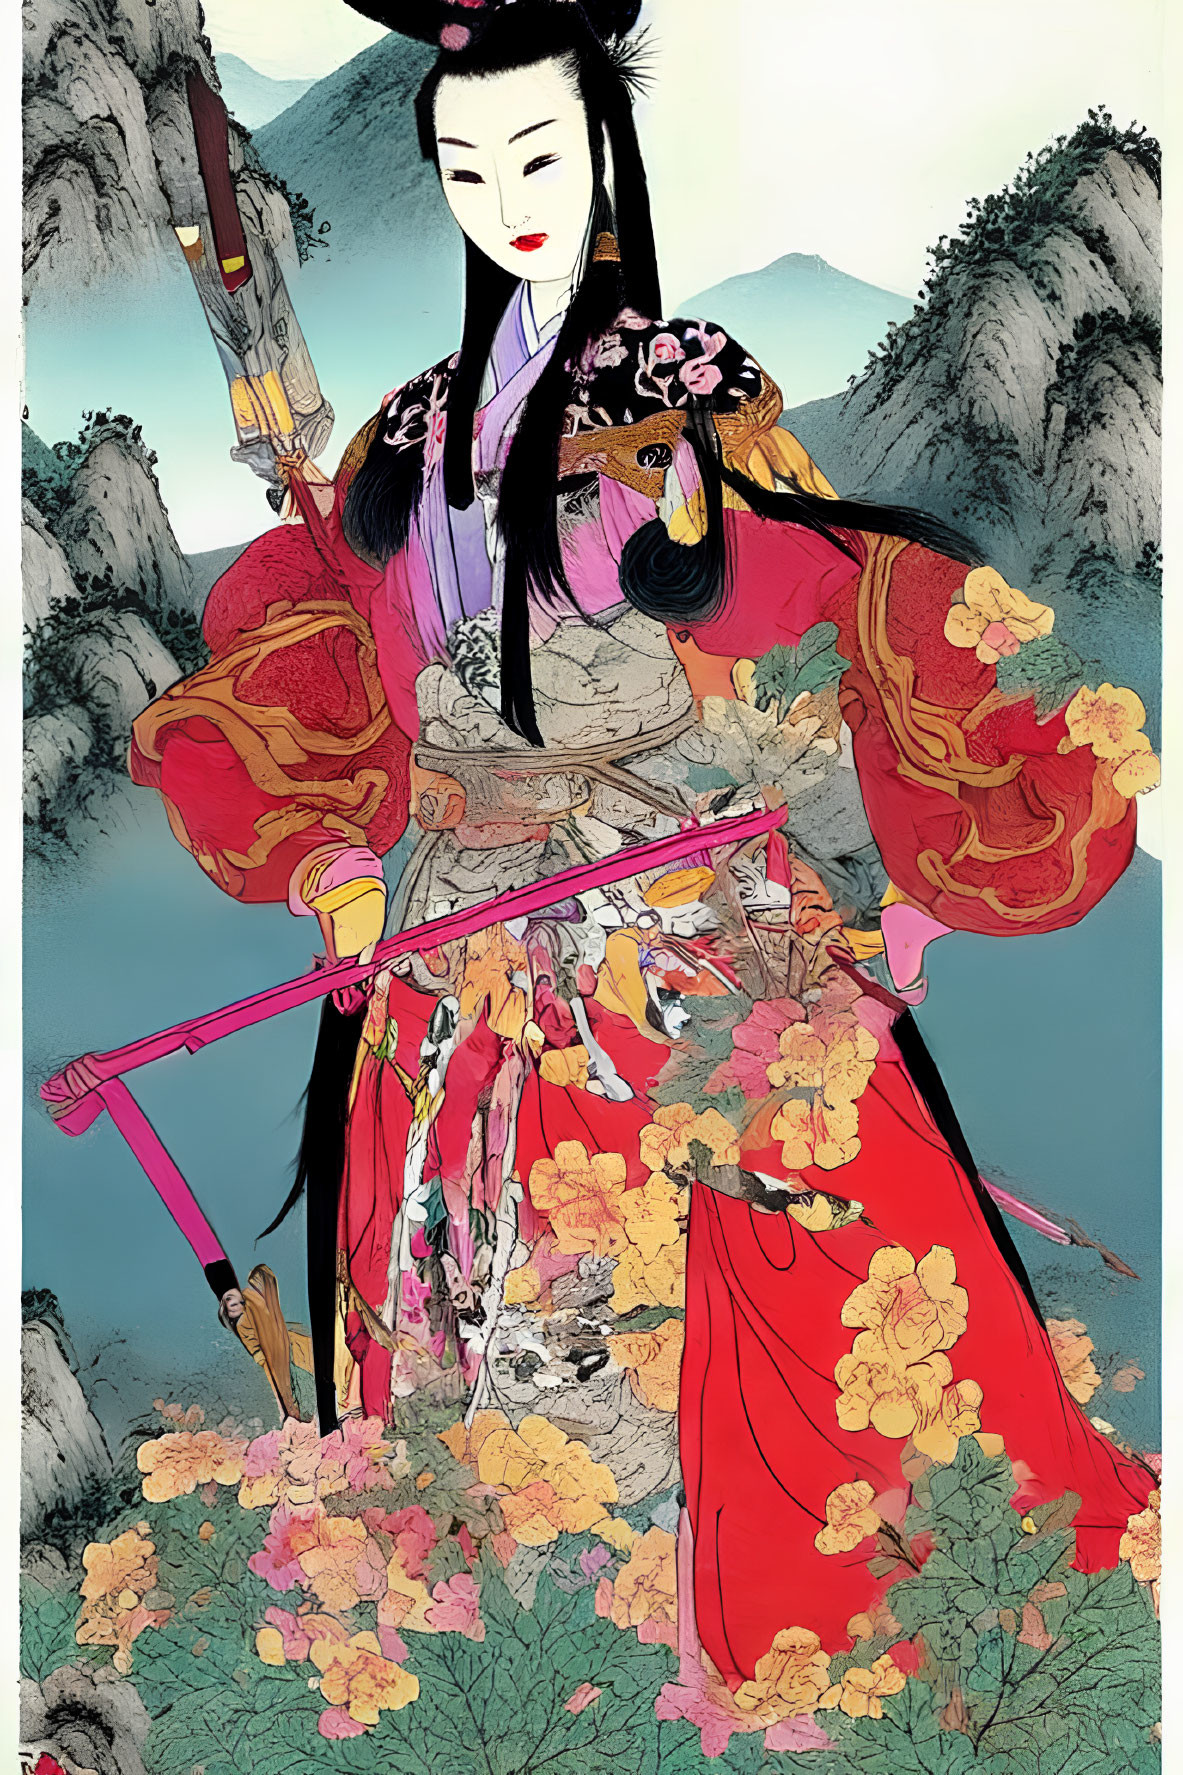 Colorful Eastern Warrior Woman with Sword in Floral Landscape